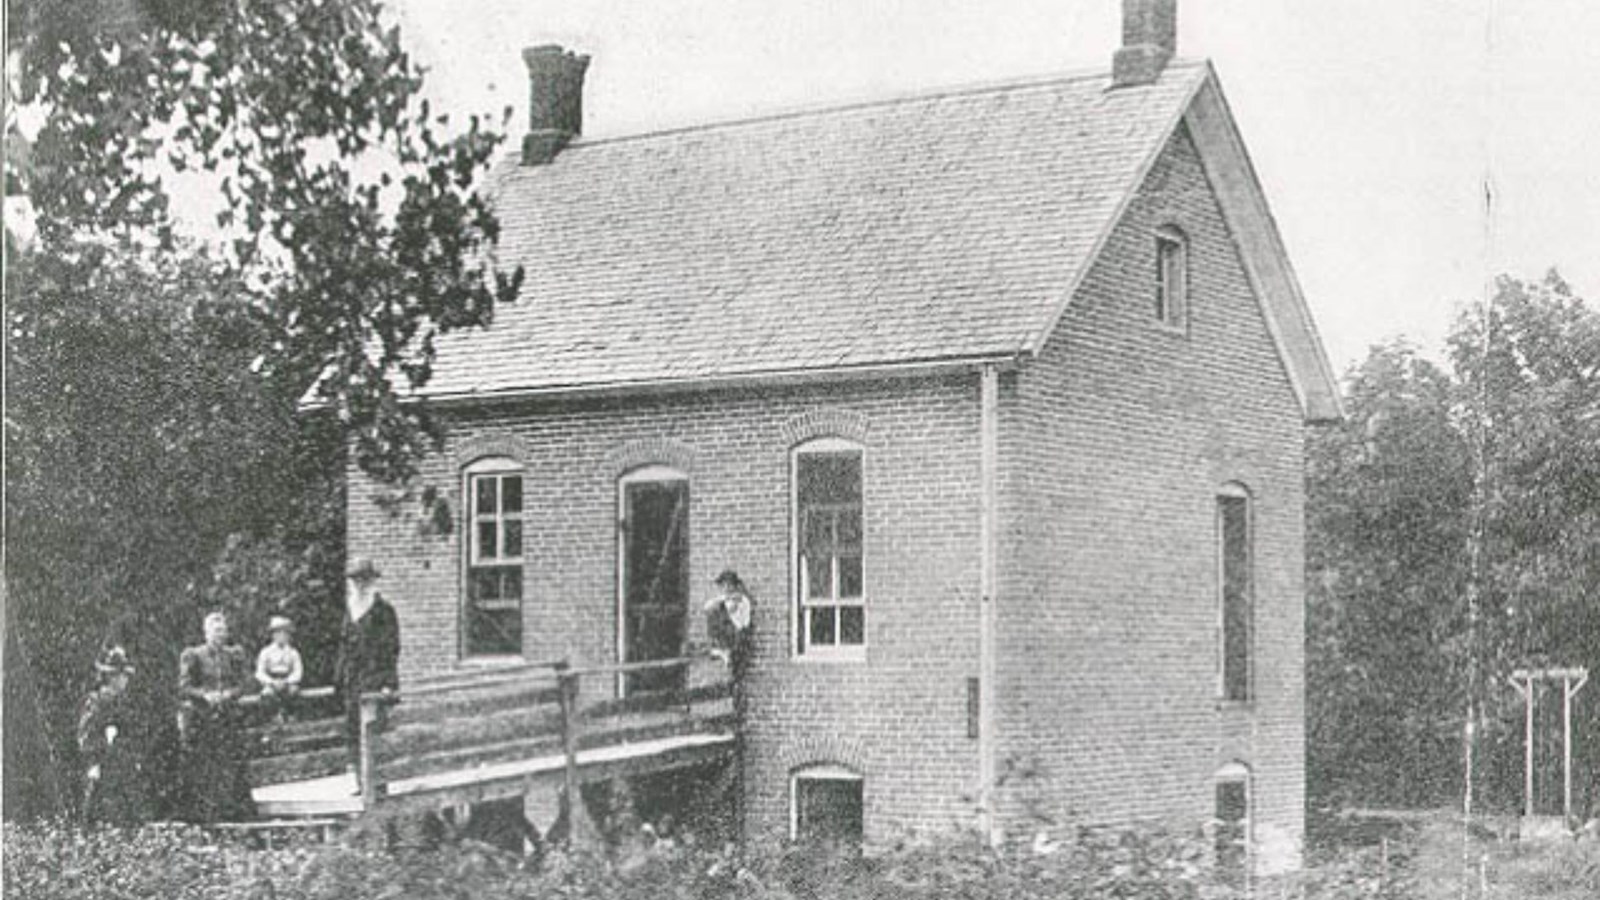 People stand on a small bridge leading into a brick home. Black and white image.